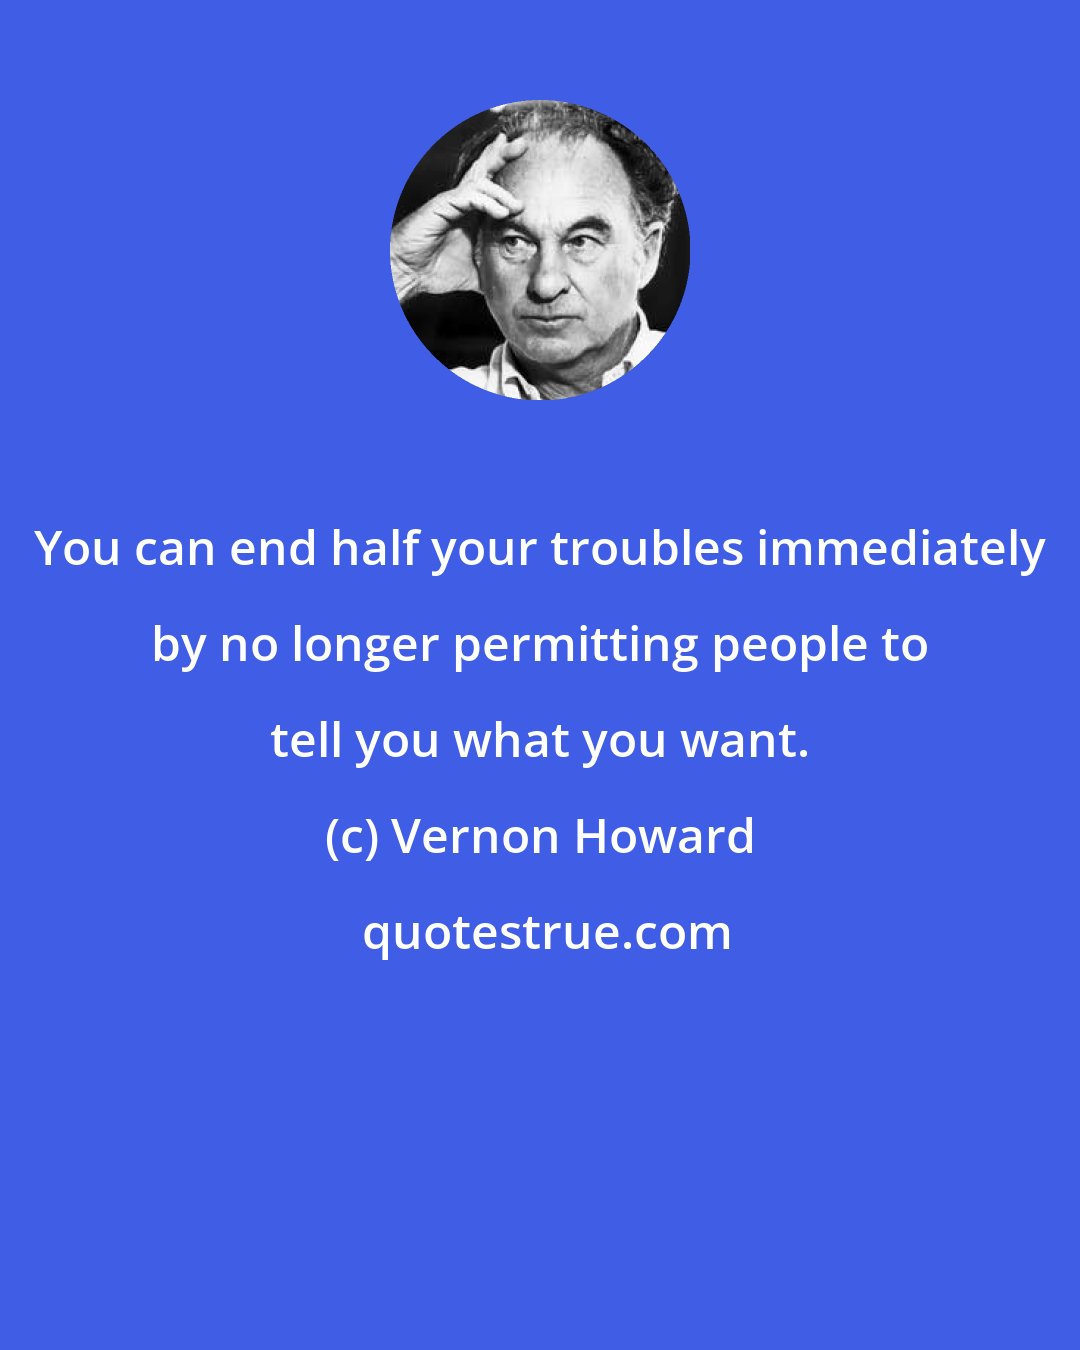 Vernon Howard: You can end half your troubles immediately by no longer permitting people to tell you what you want.